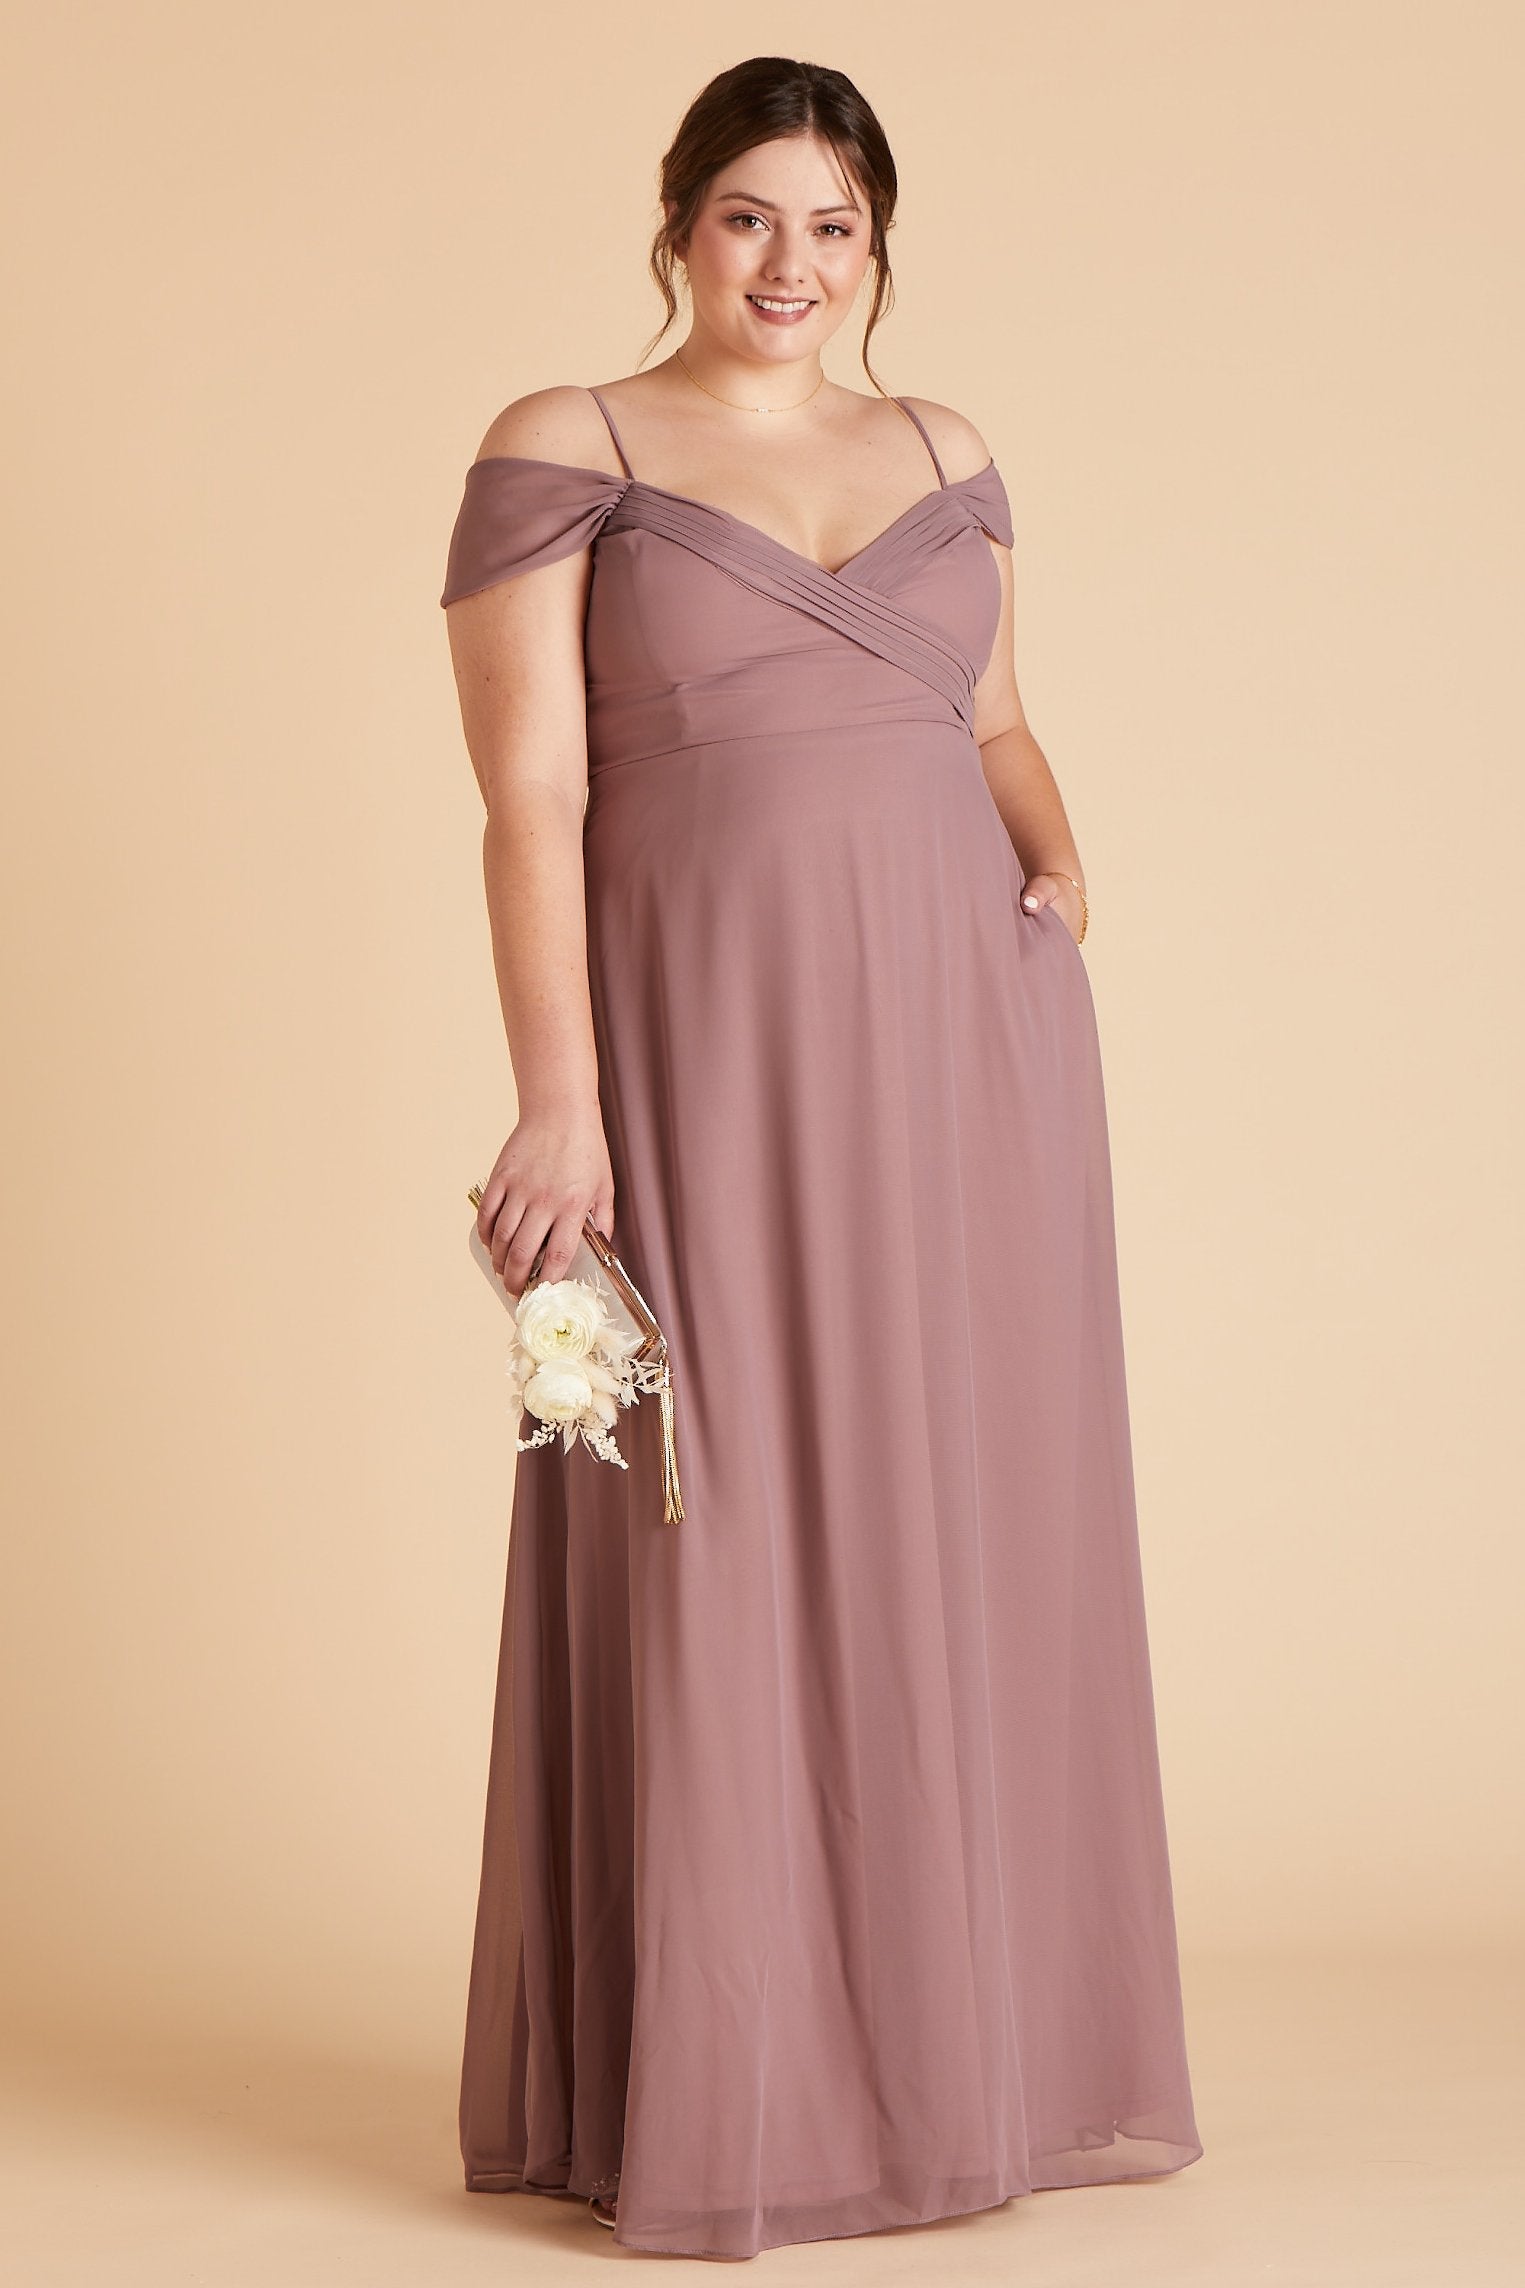 Spence convertible plus size bridesmaid dress in dark mauve chiffon by Birdy Grey, front view with hand in pocket